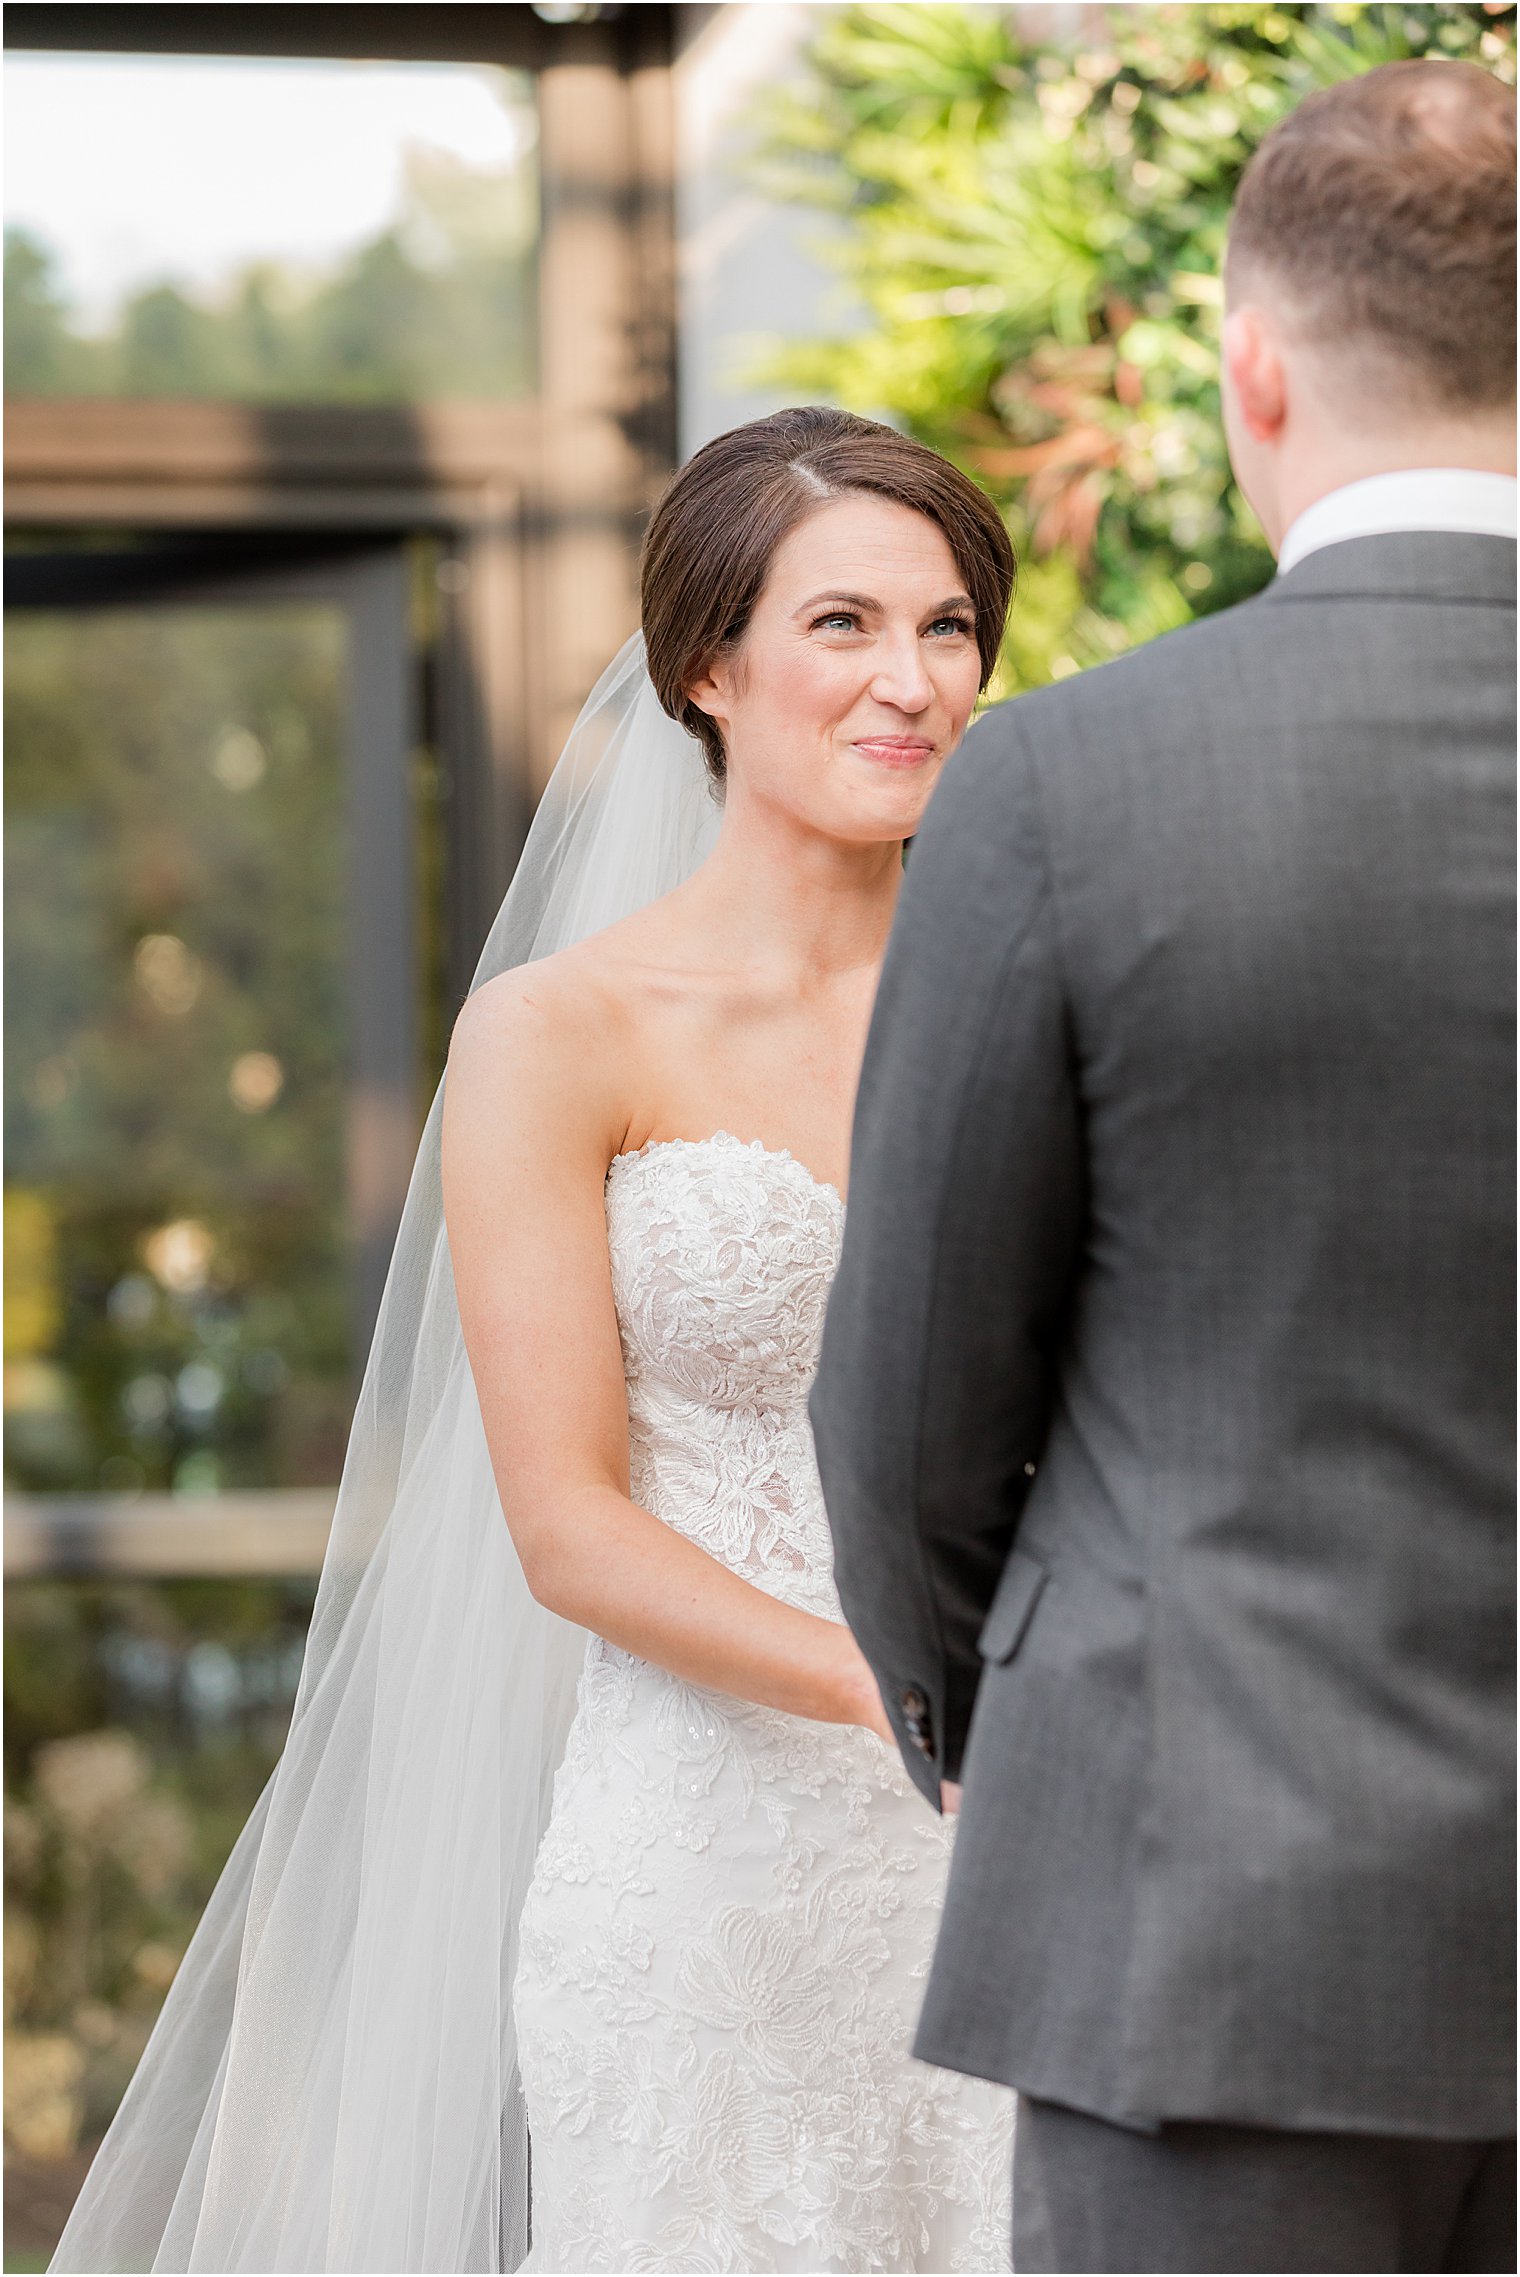 bride smiles at groom during outdoor wedding ceremony in courtyard